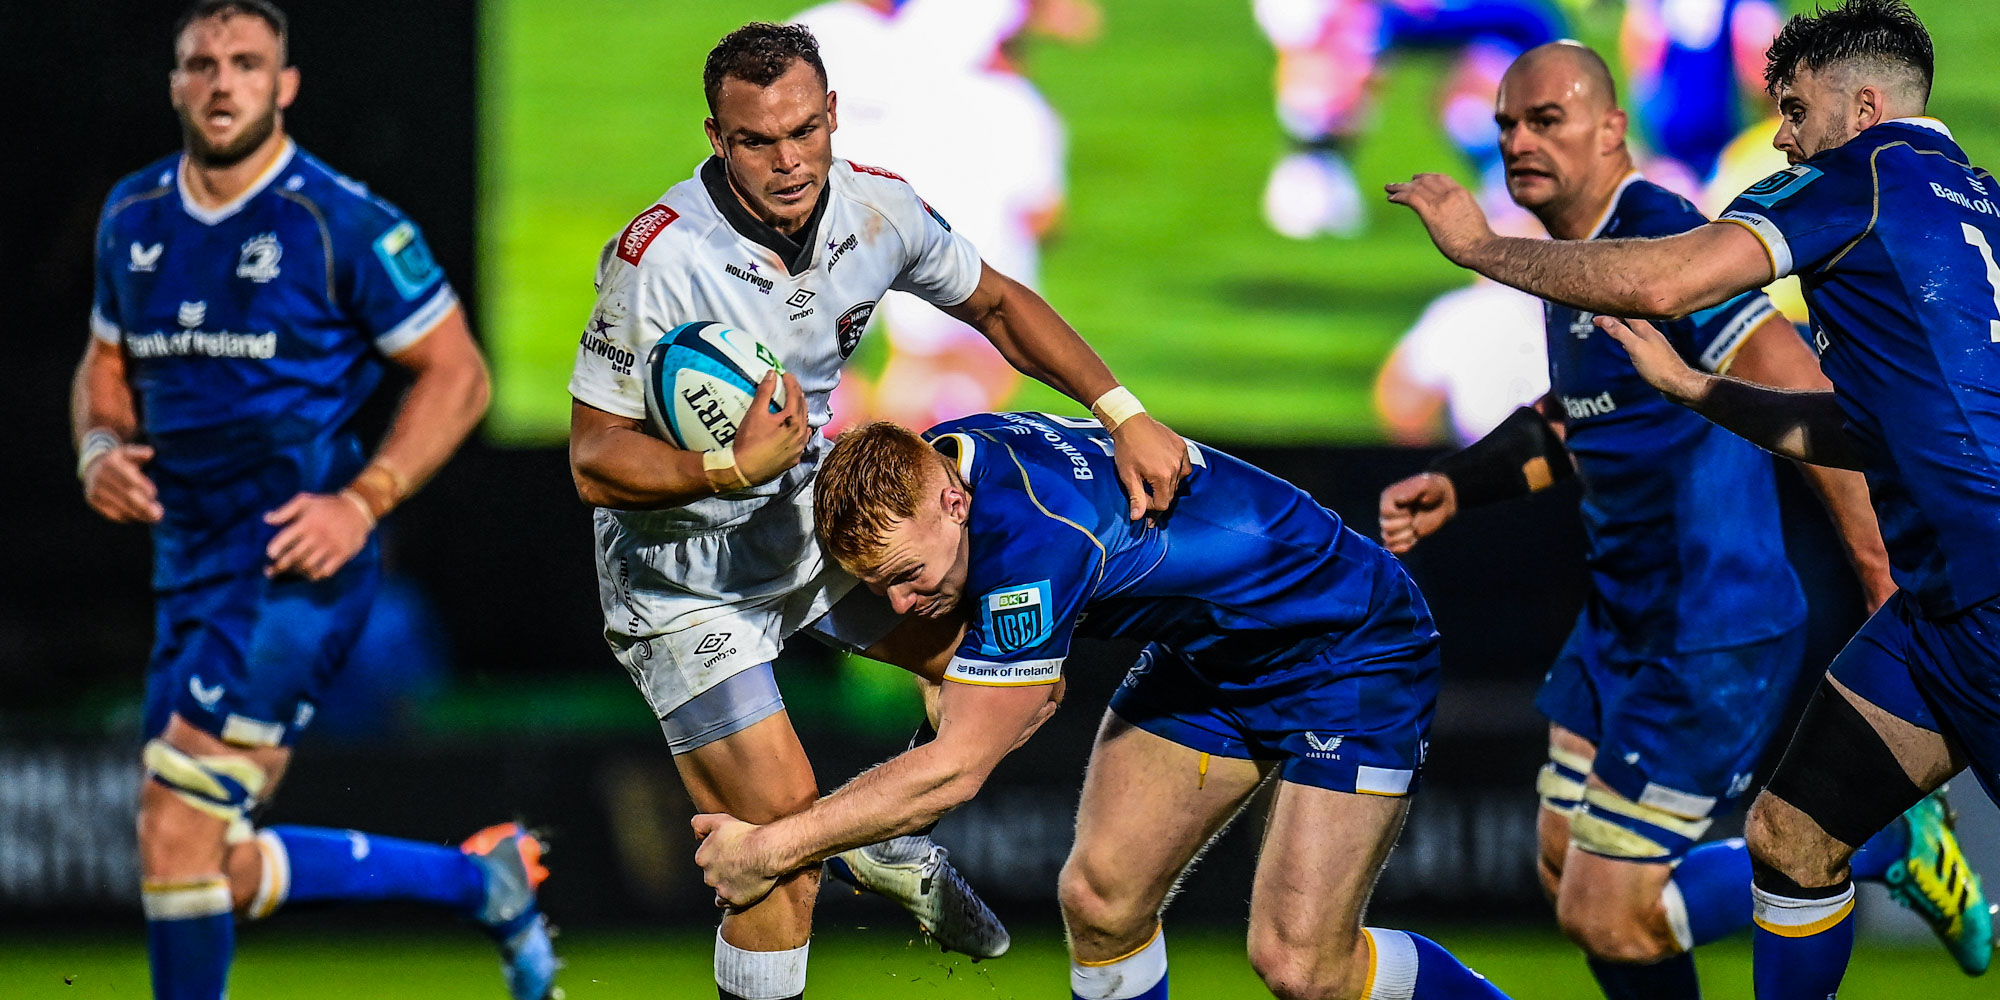 The Hollywoodbets Sharks' Curwin Bosch runs into strong Leinster defence.